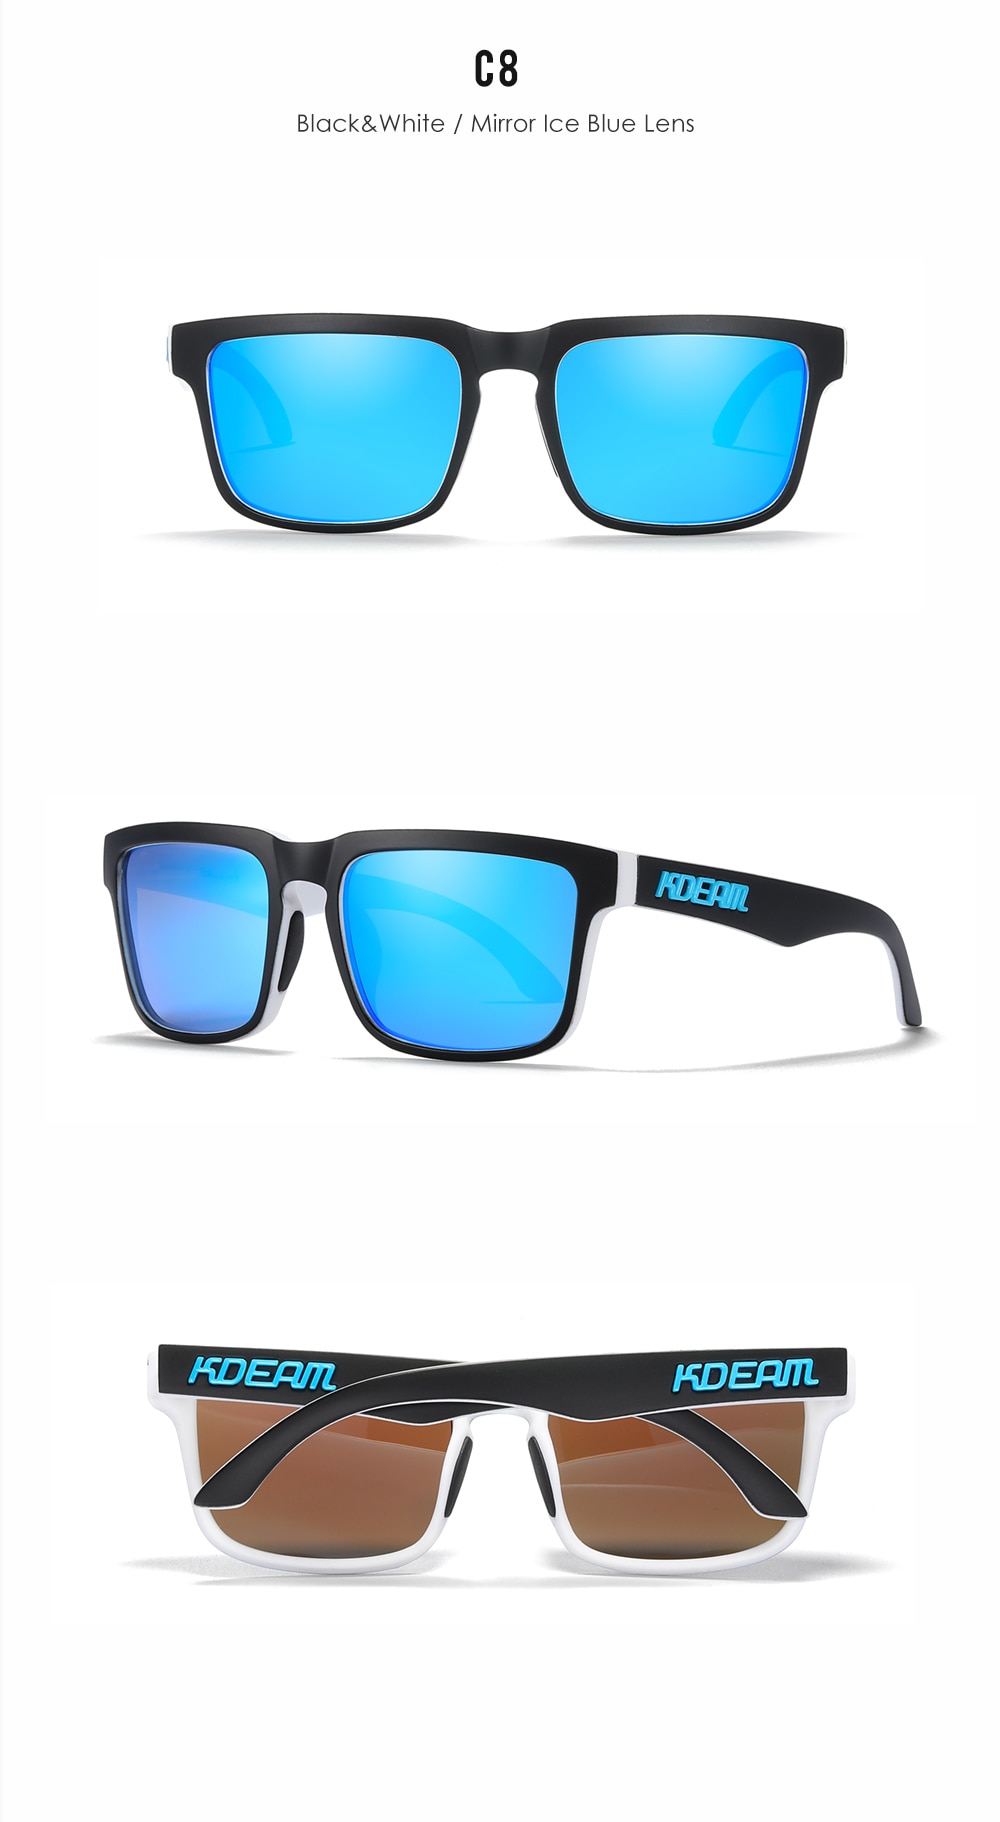 KDEAM Brand New 3D Logo Square Polarized Sunglasses Vacationing Driving Sun Glasses Real Coating Lense KD332